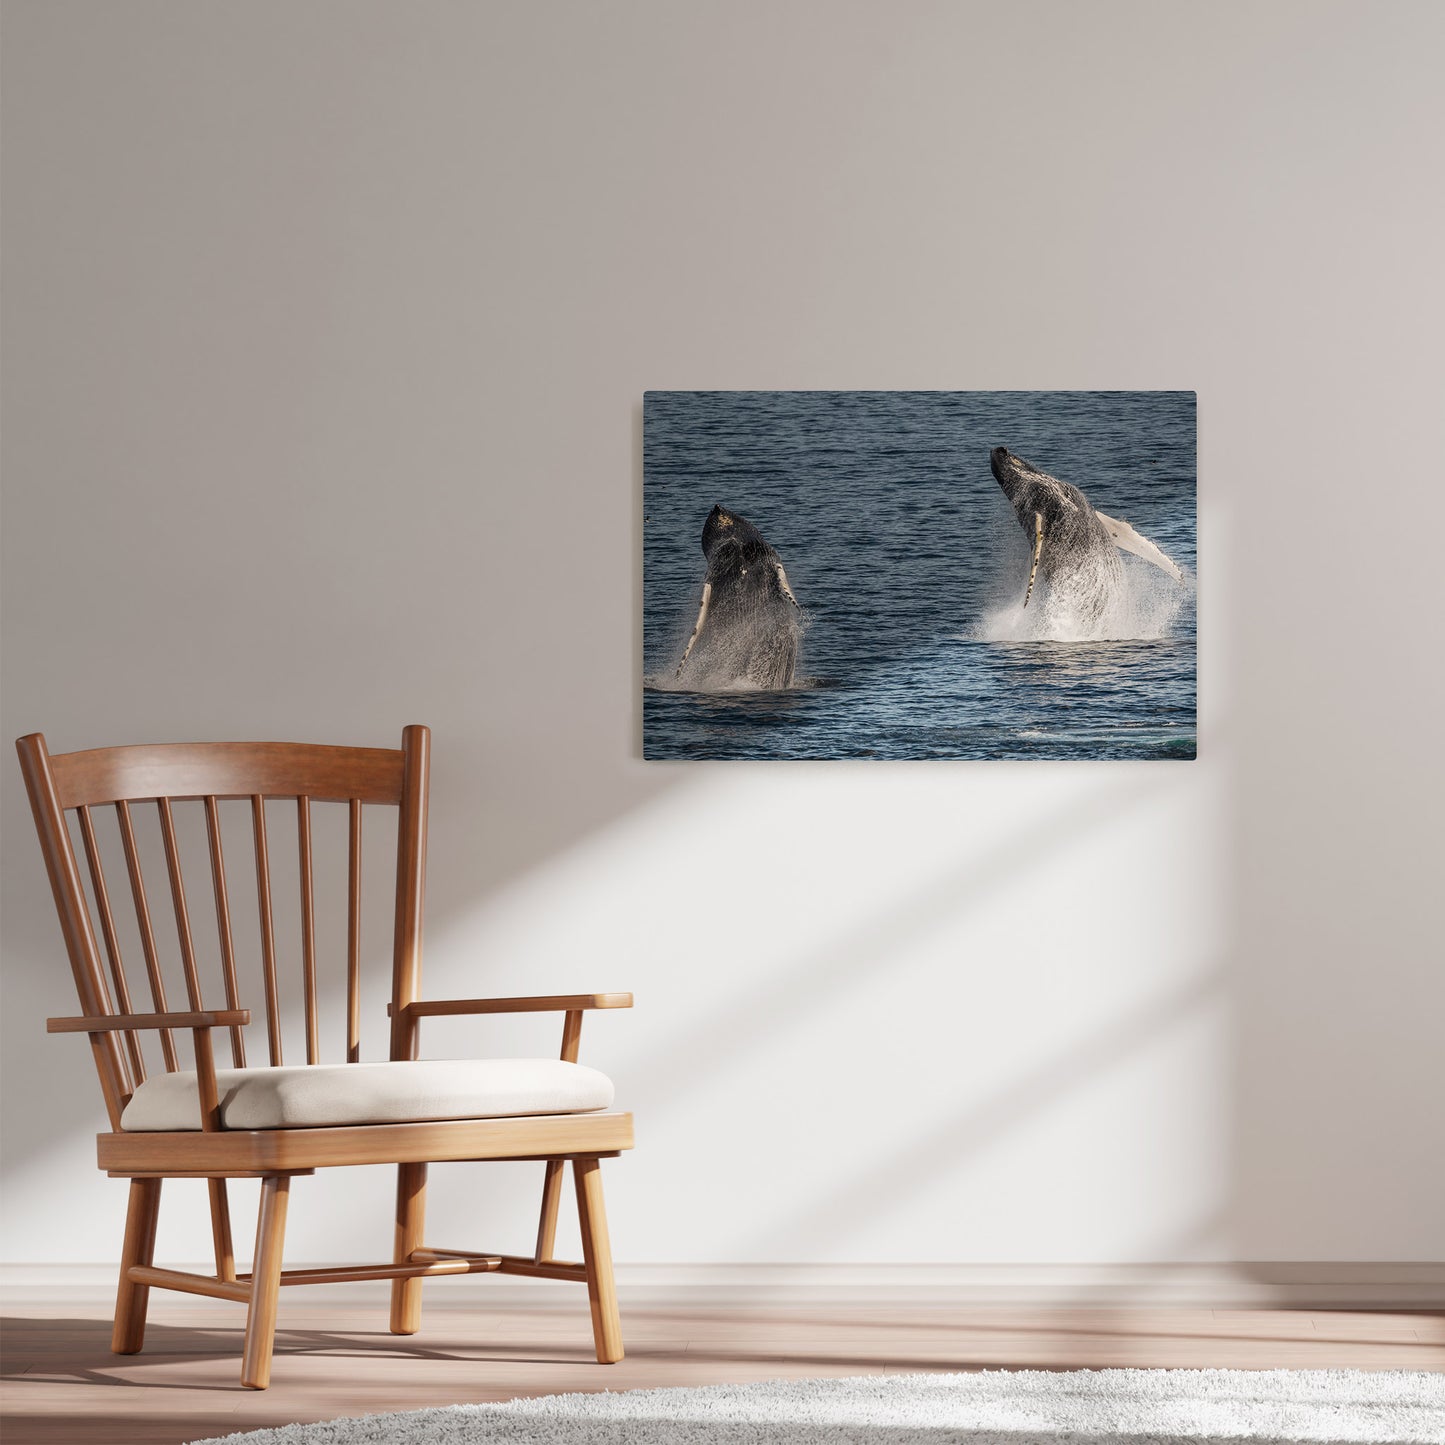 Ray Mackey's Double Whales photography reproduced on HD metal print and displayed on wall